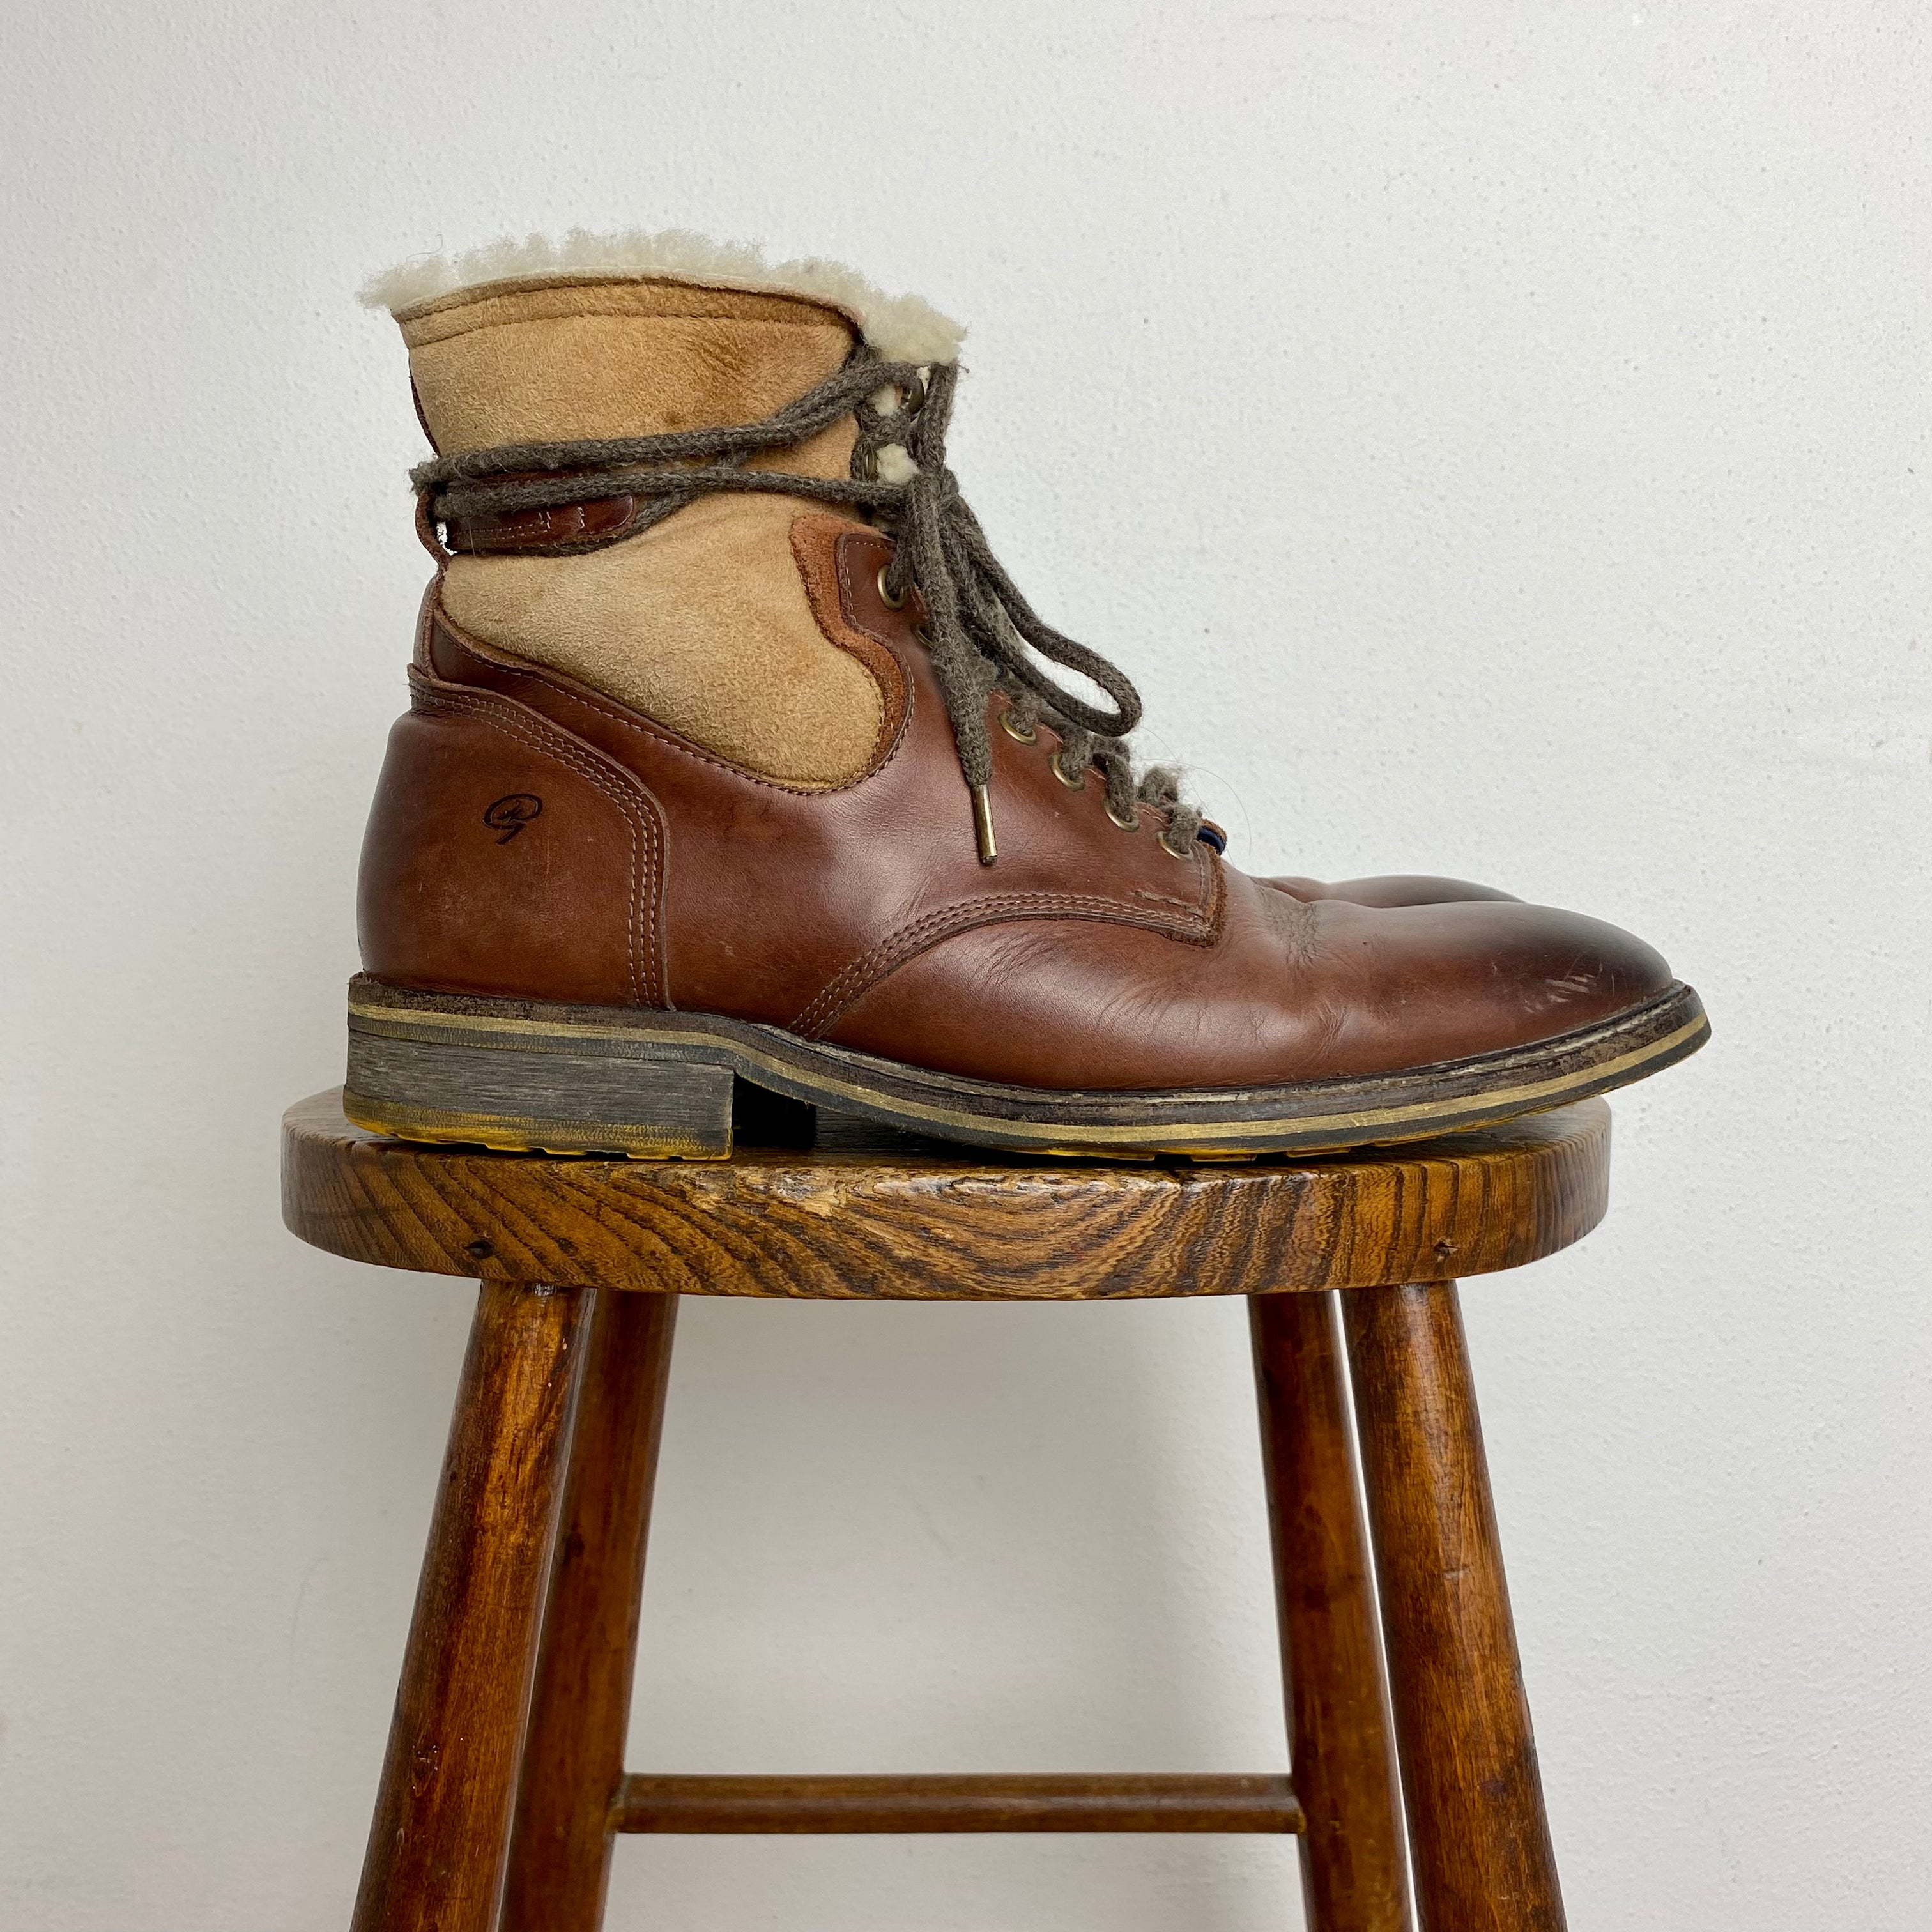 Lace-up Boots wit Wool Lining - EU 43